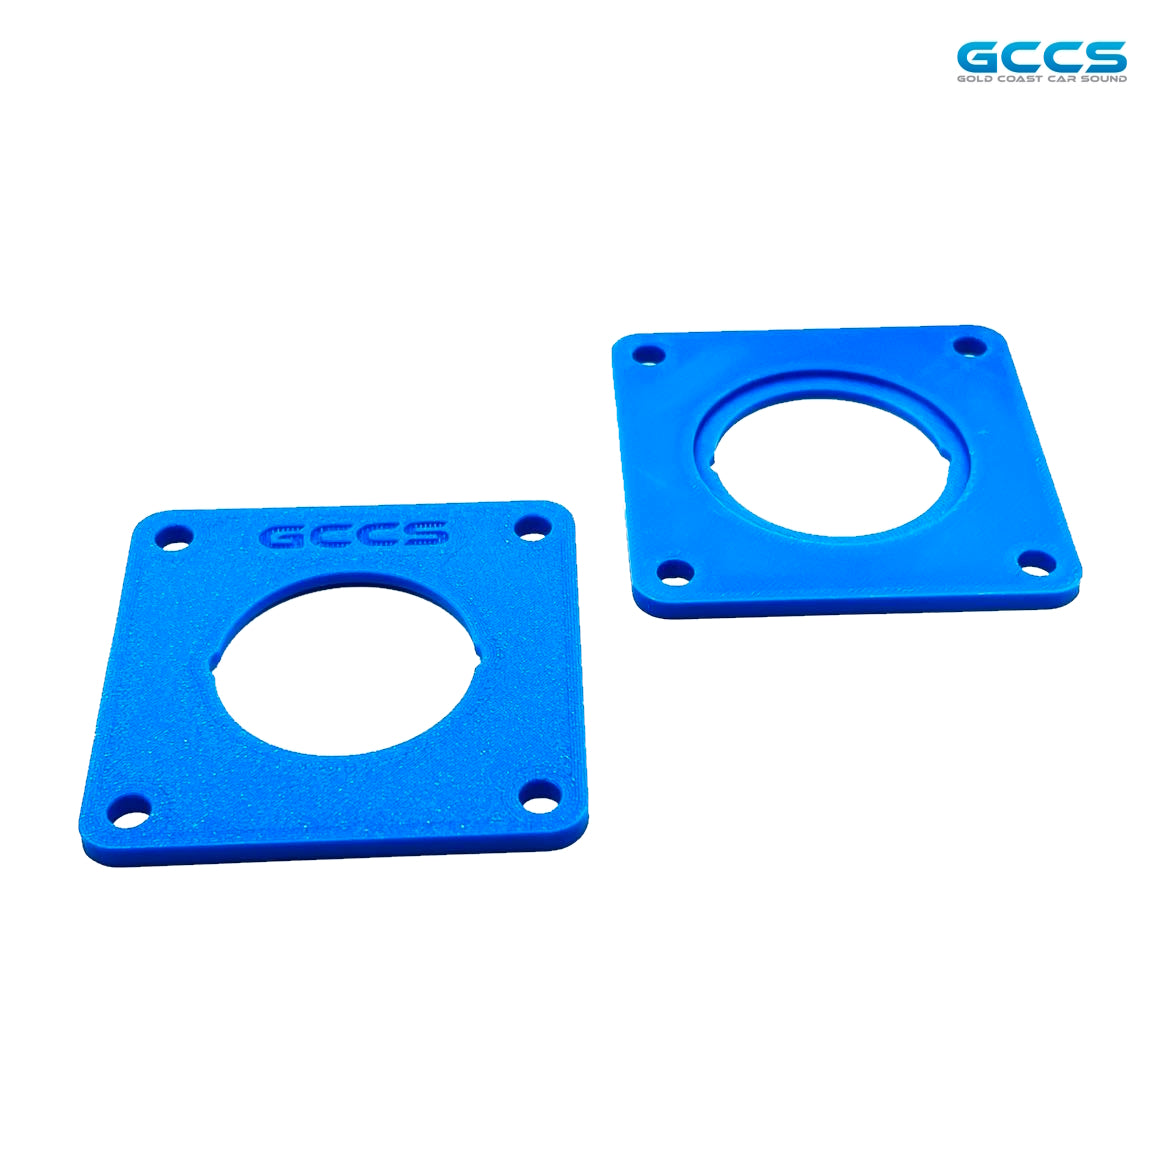 GCCS Front Tweeter Mounts for Nissan Patrol Y62 & Other Nissan Vehicles